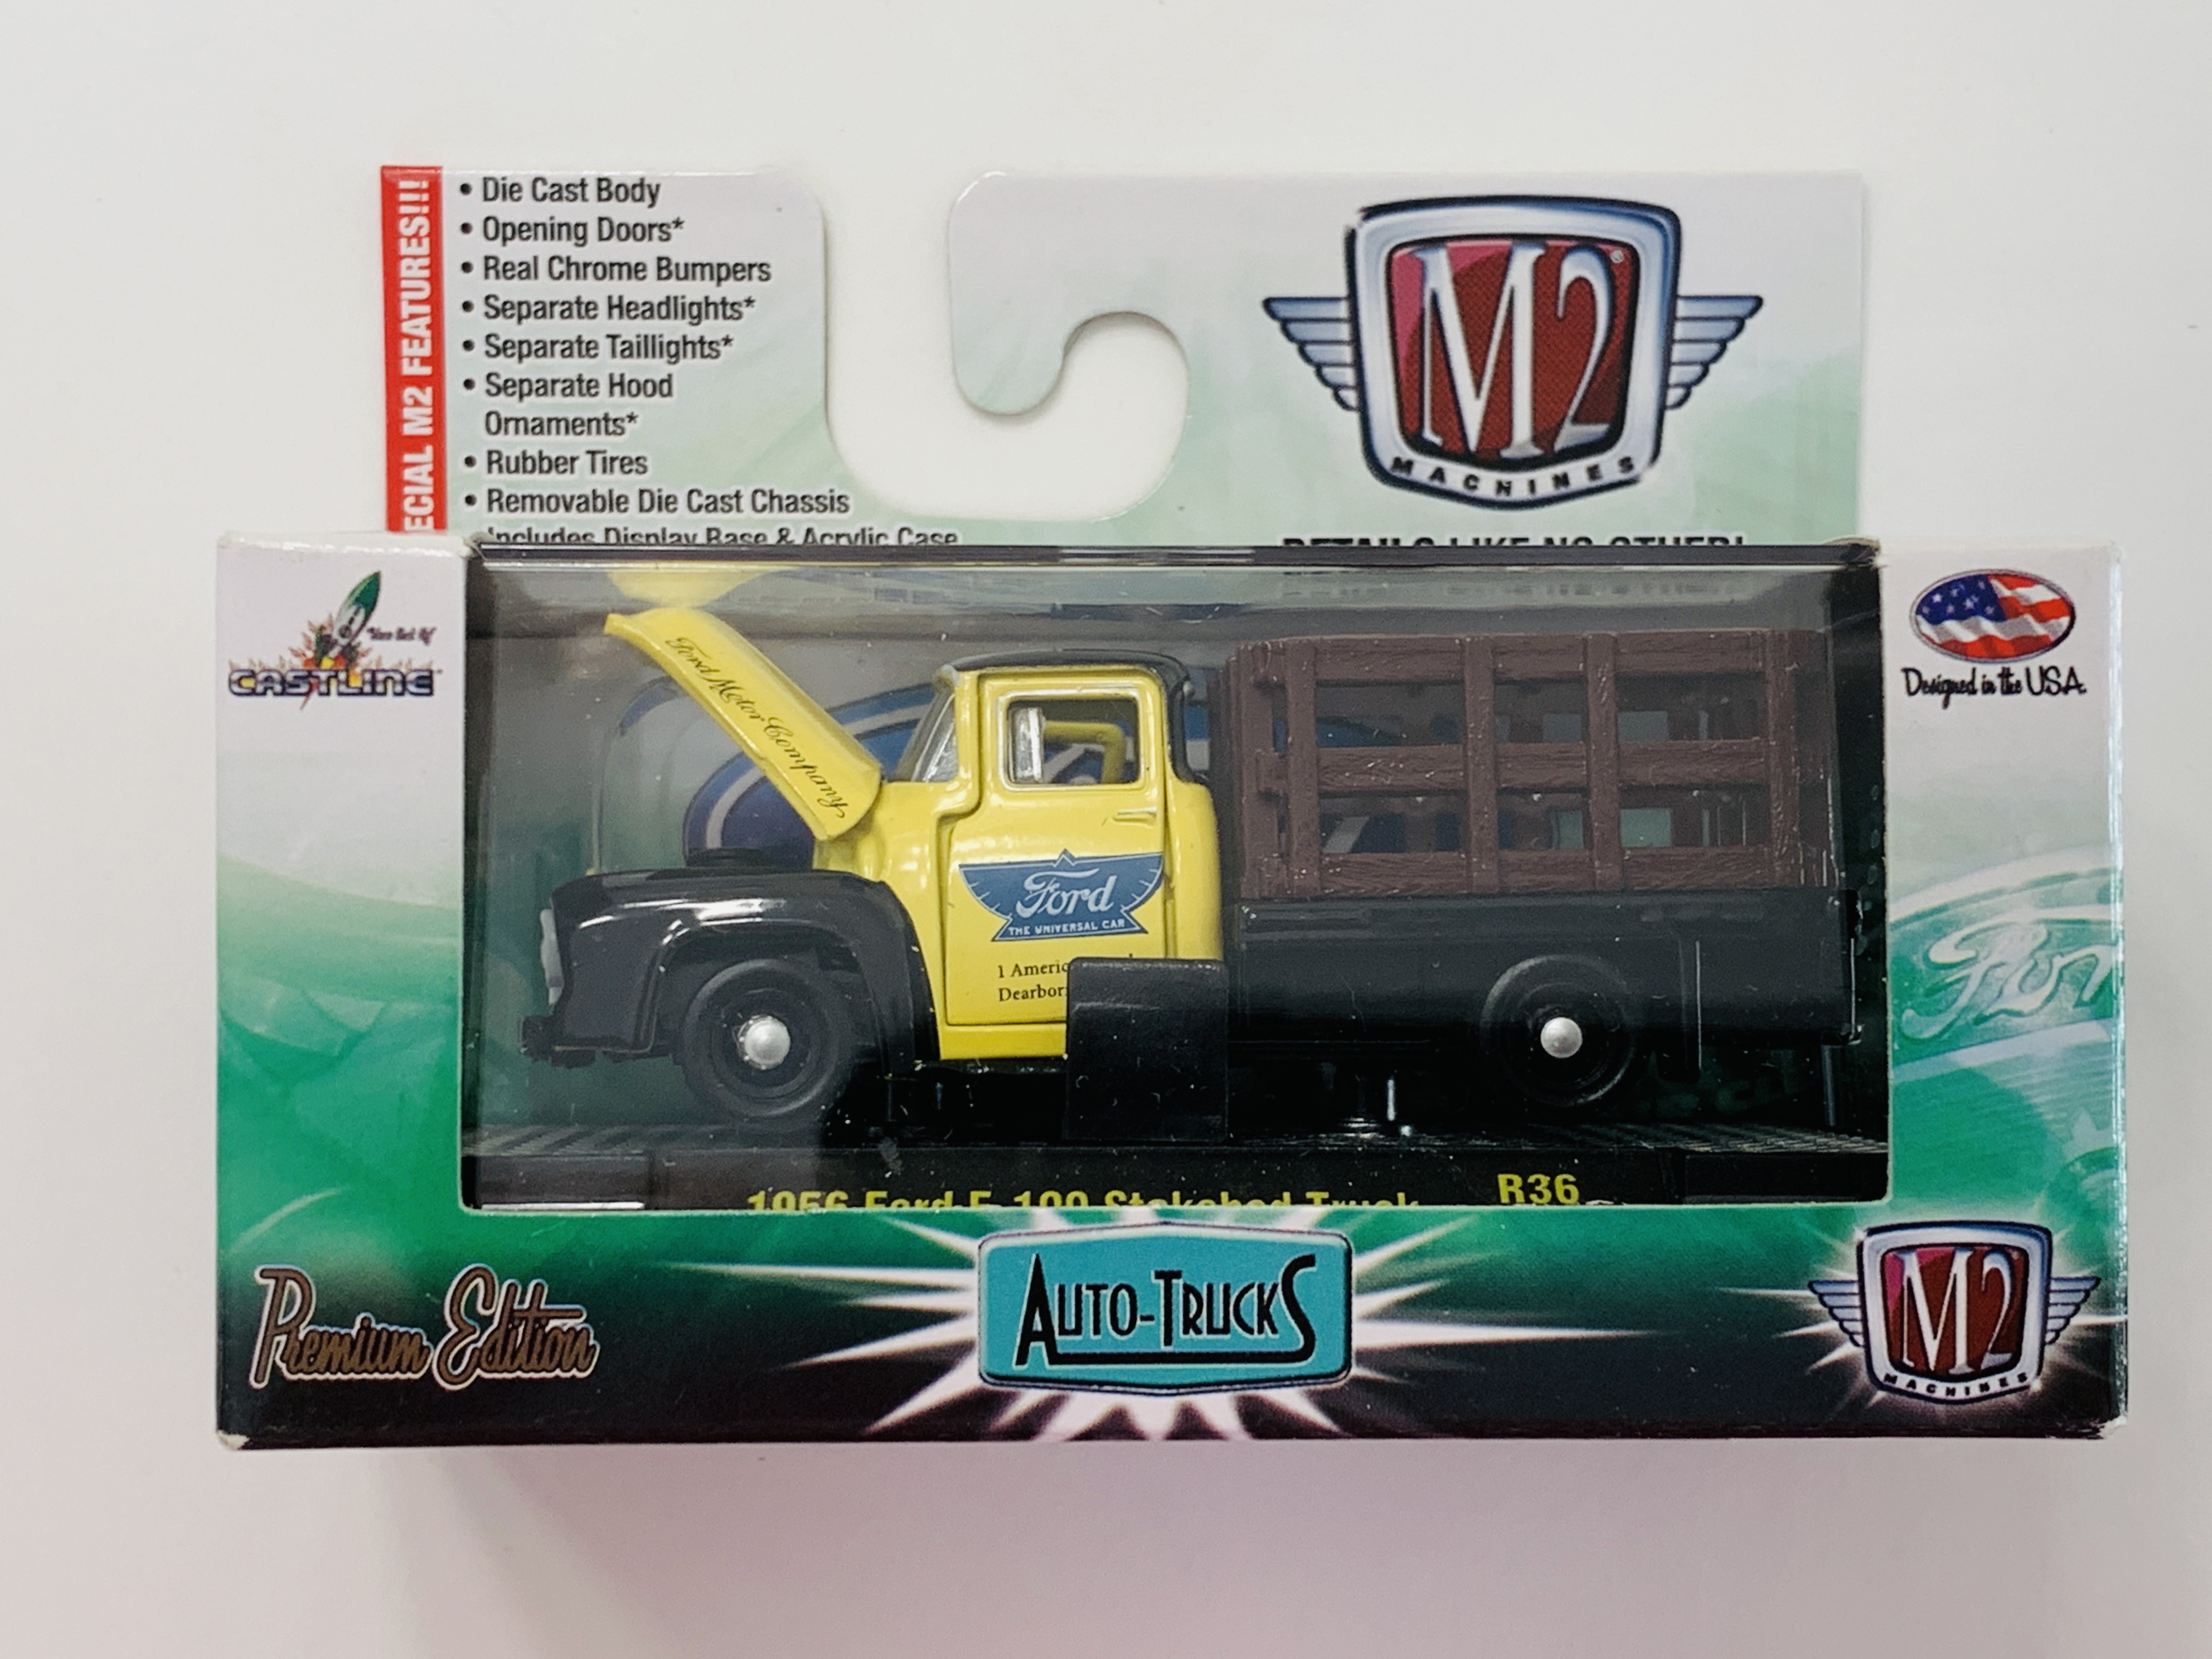 M2 Machines Auto-Trucks 1956 Ford F-100 Stakebed Truck R36